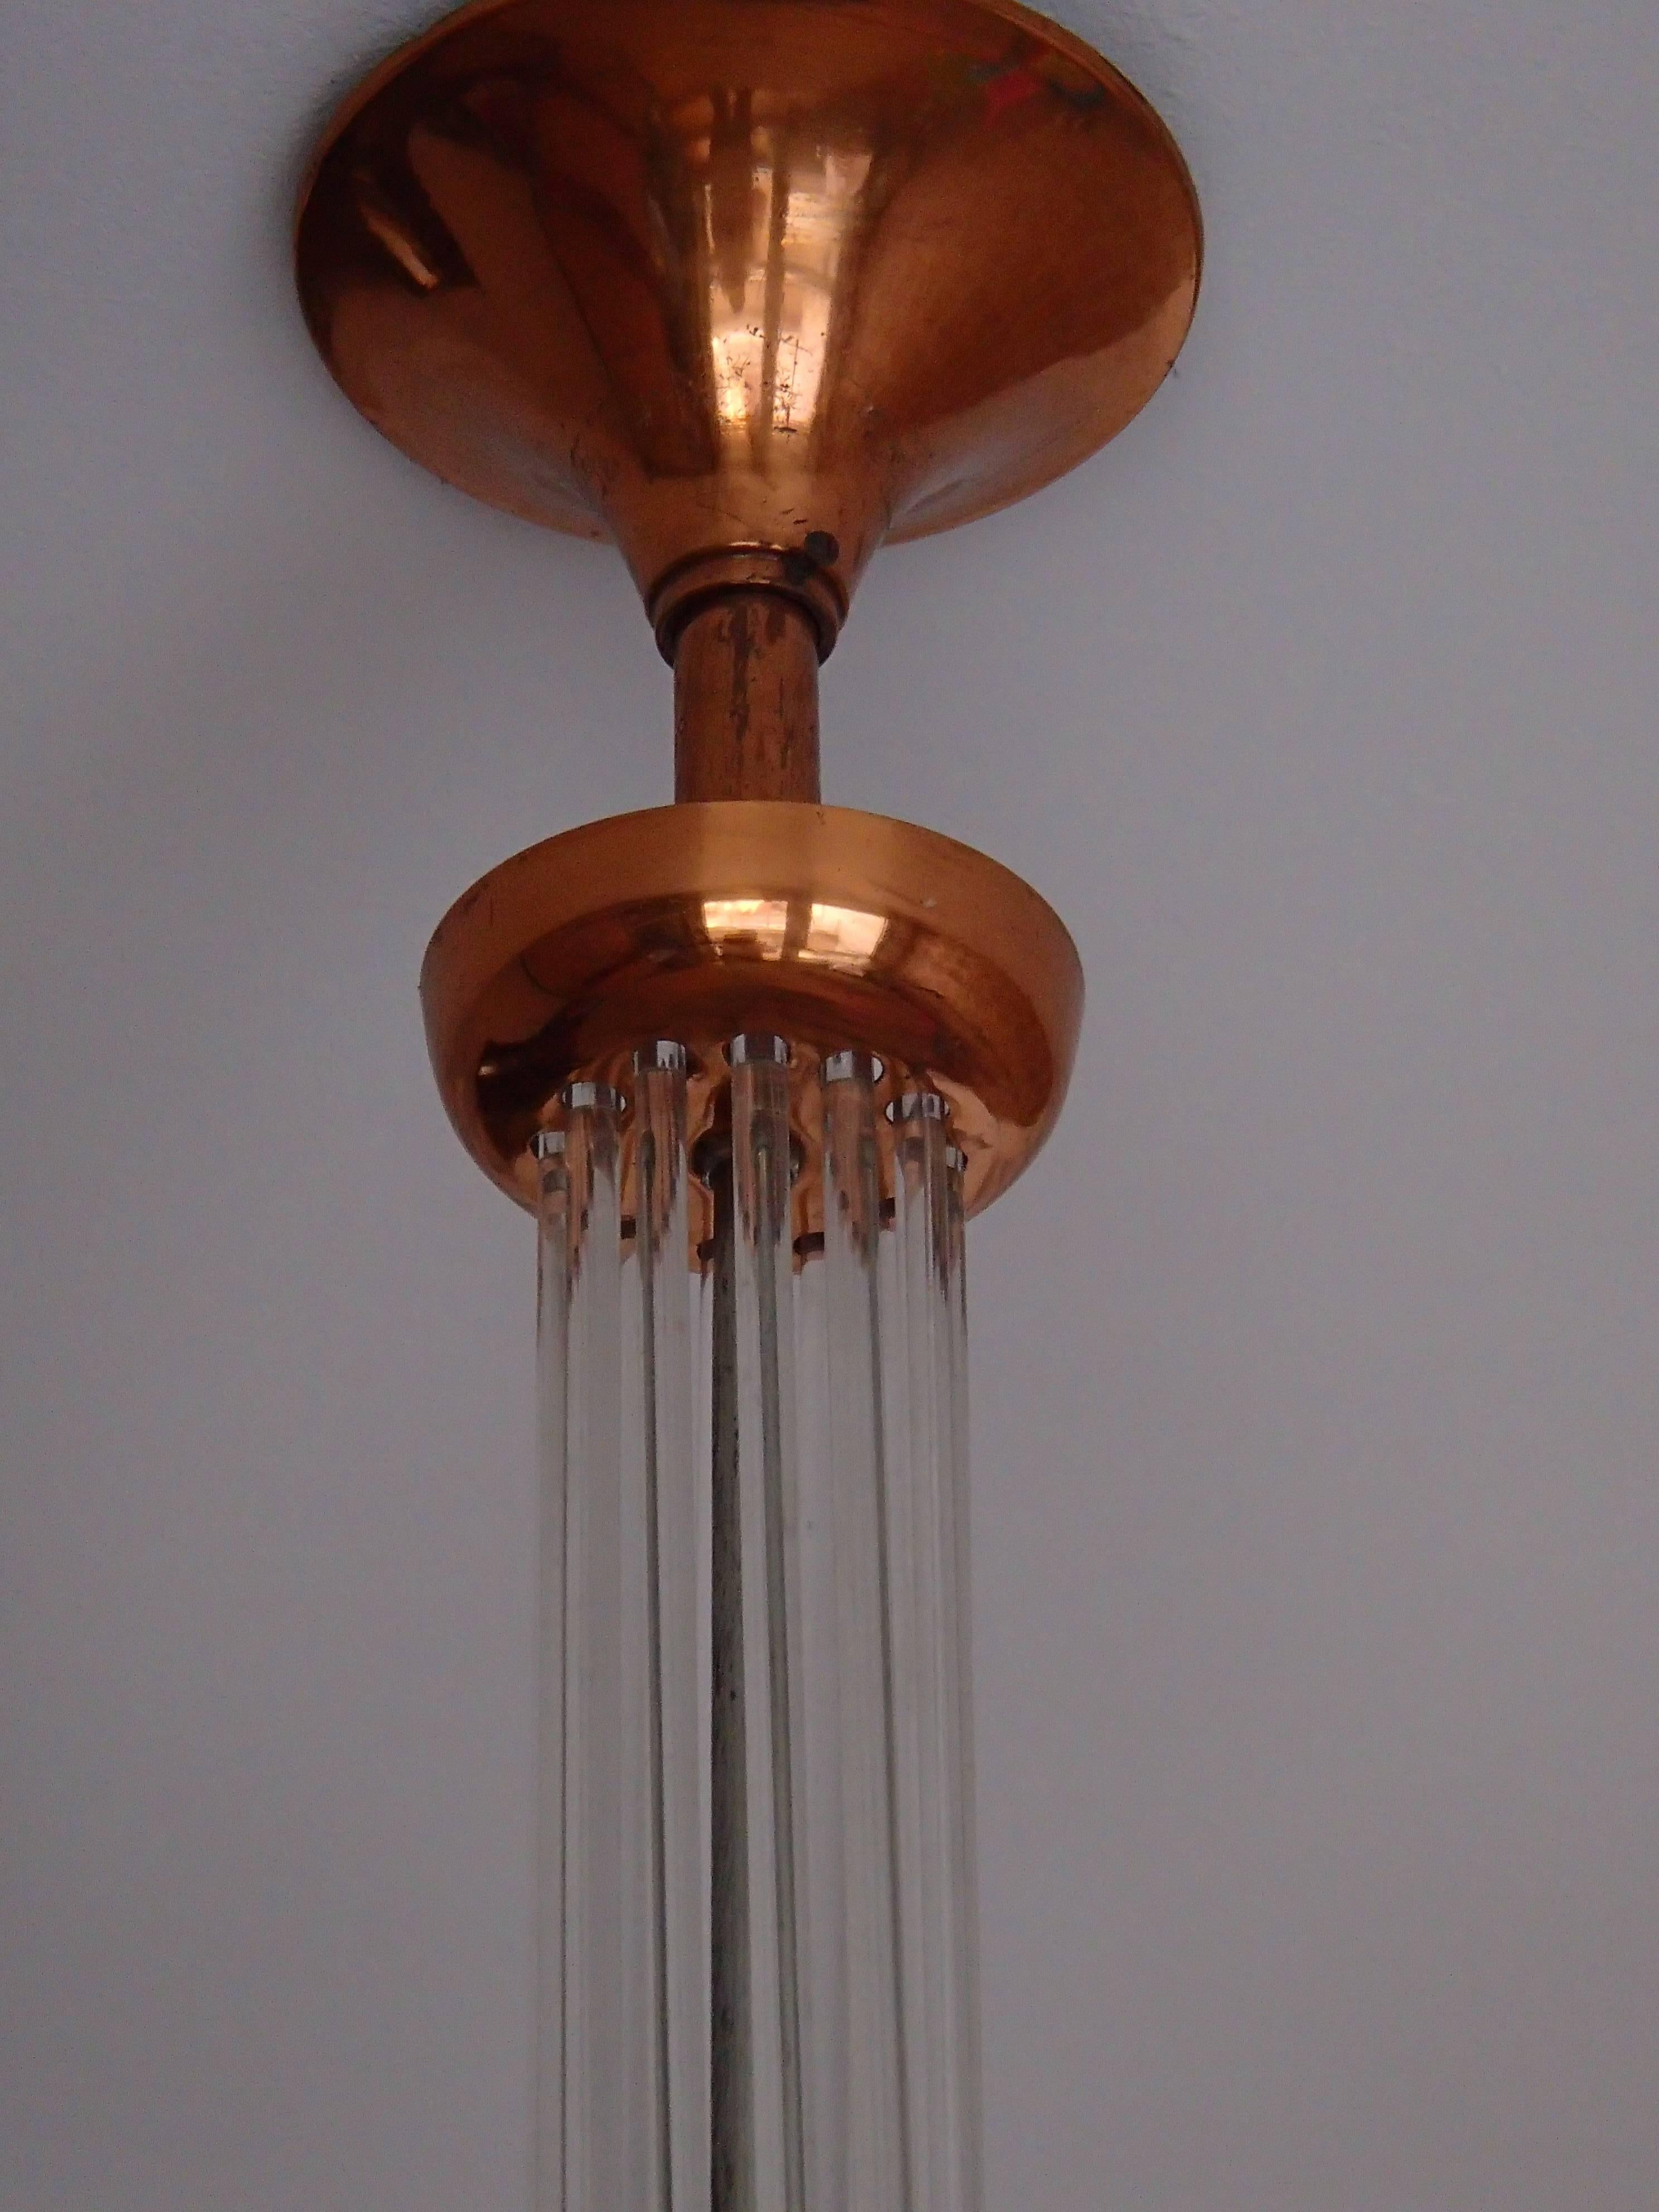 Art Deco chandlier copper with glass pink glass ball and glass sticks.